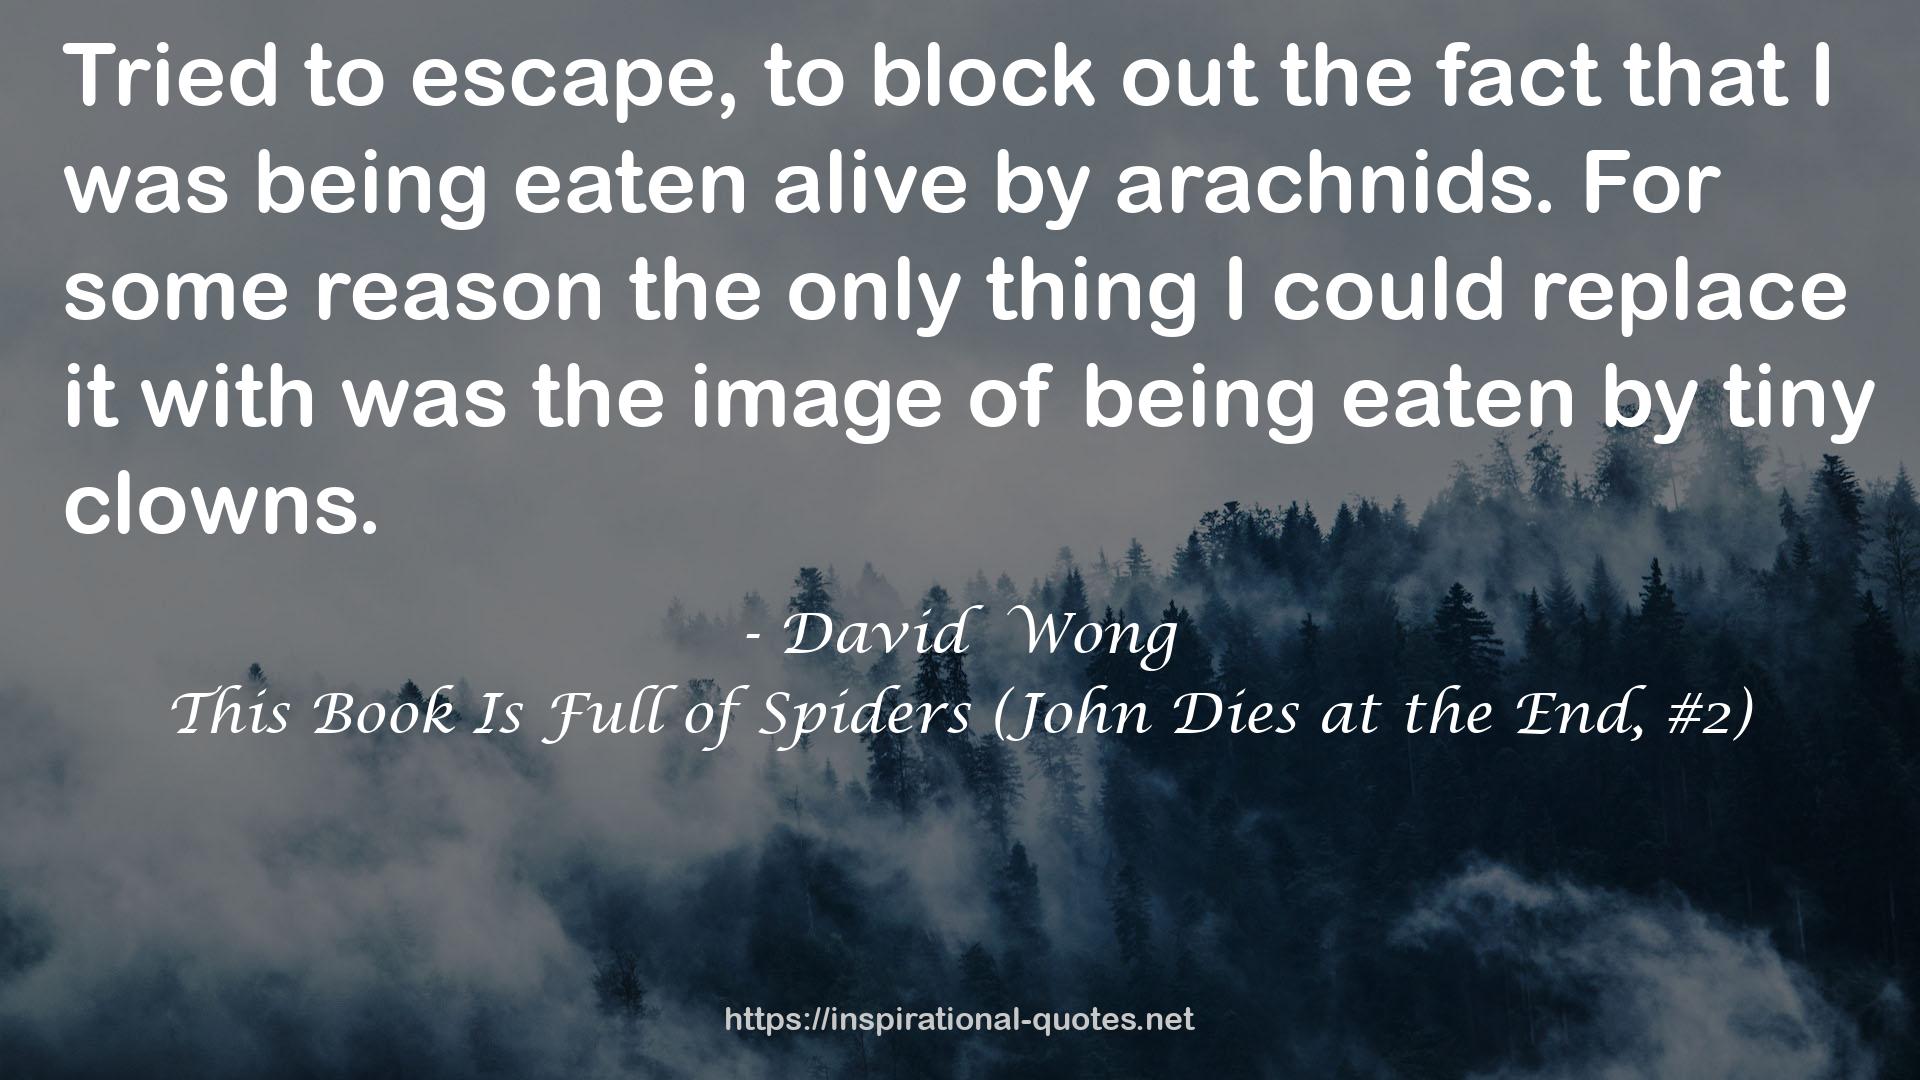 This Book Is Full of Spiders (John Dies at the End, #2) QUOTES